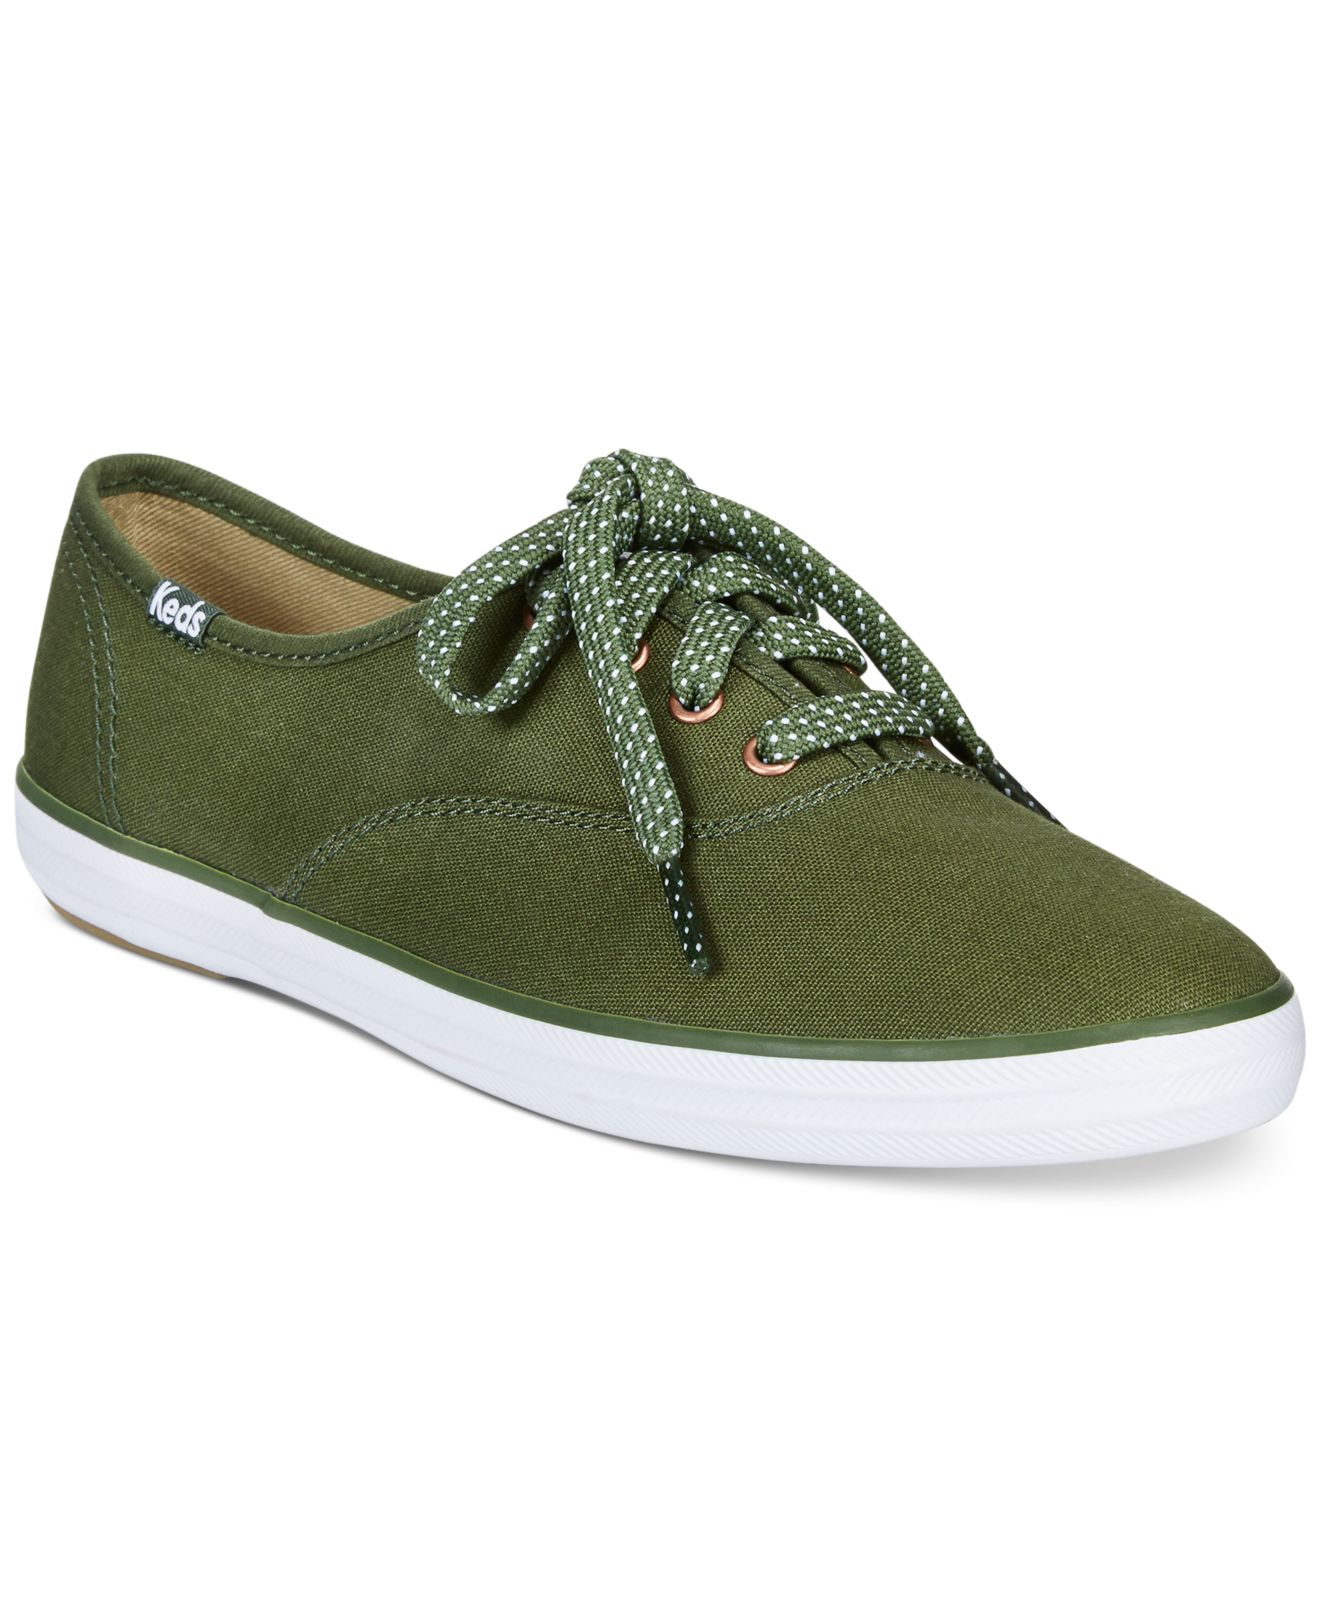 Keds Women's Champion Oxford Sneakers in Green | Lyst